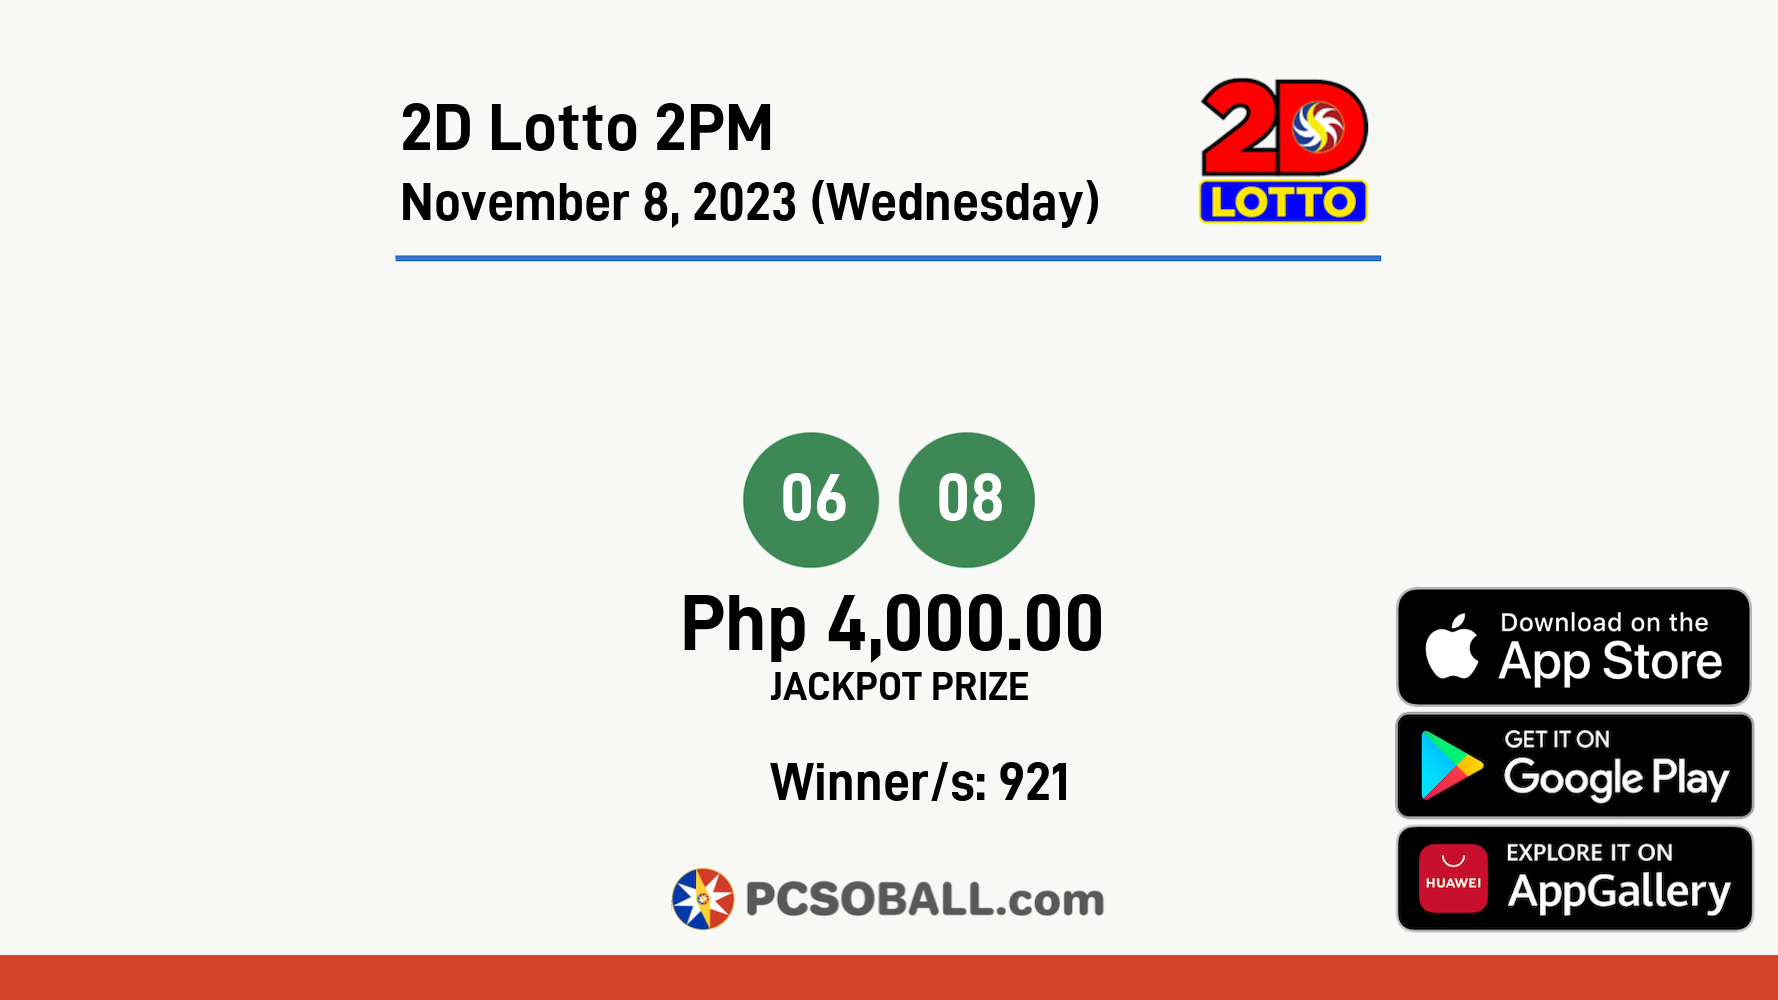 2D Lotto 2PM November 8, 2023 (Wednesday) Result